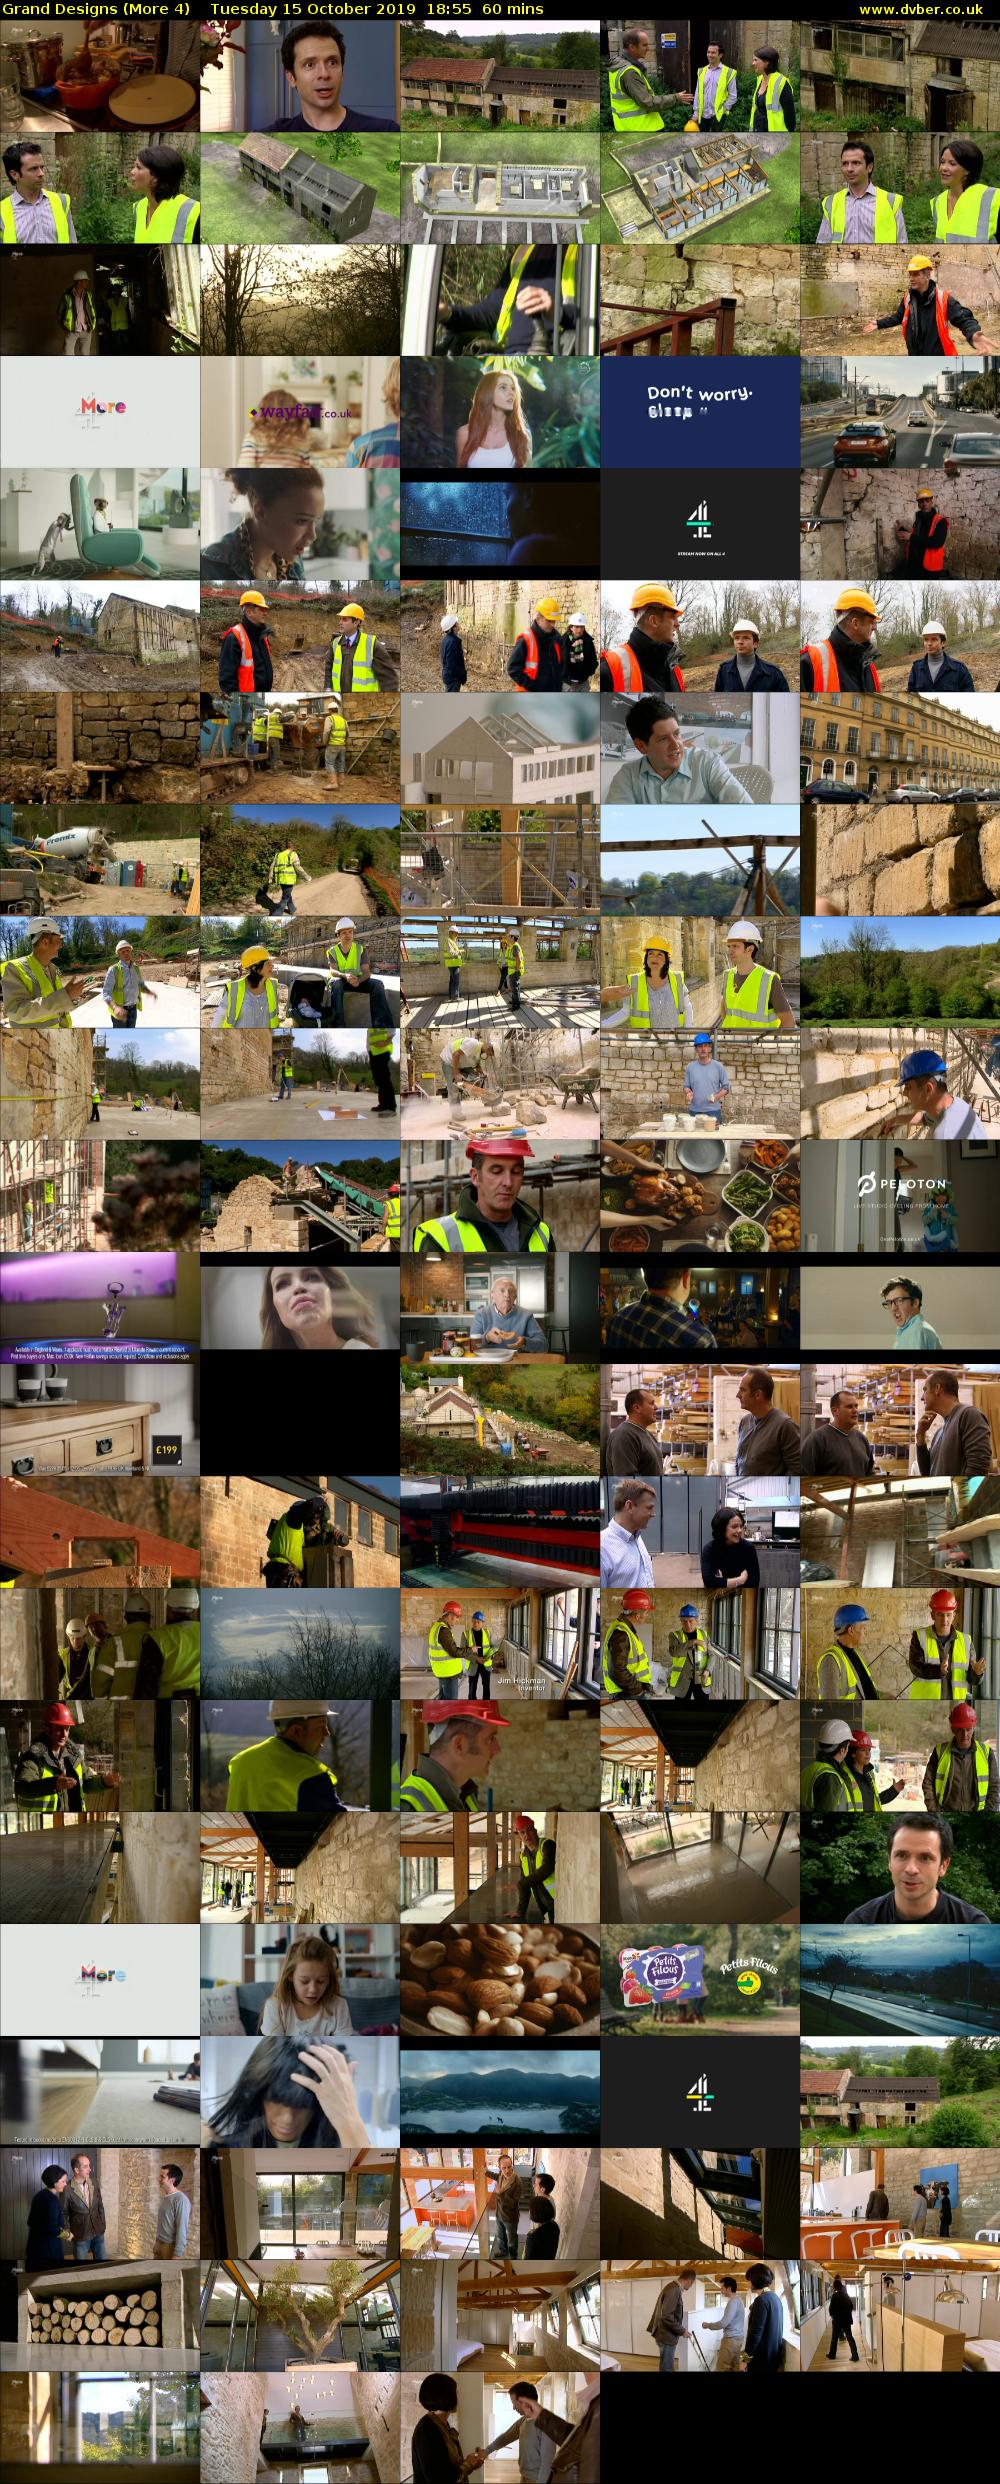 Grand Designs (More 4) Tuesday 15 October 2019 18:55 - 19:55